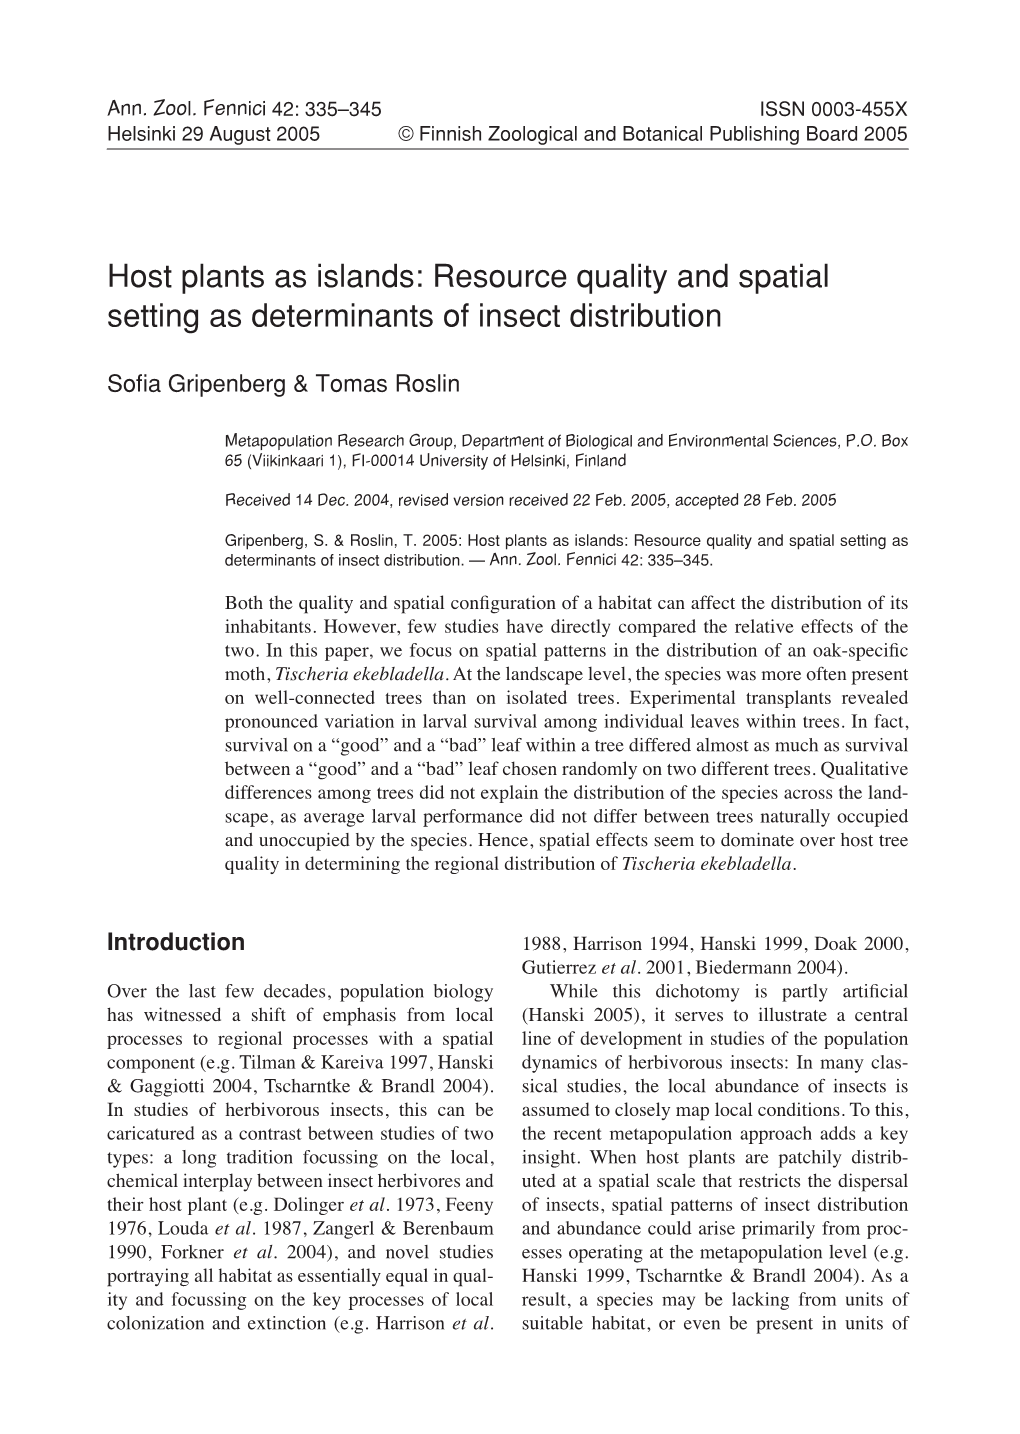 Host Plants As Islands: Resource Quality and Spatial Setting As Determinants of Insect Distribution